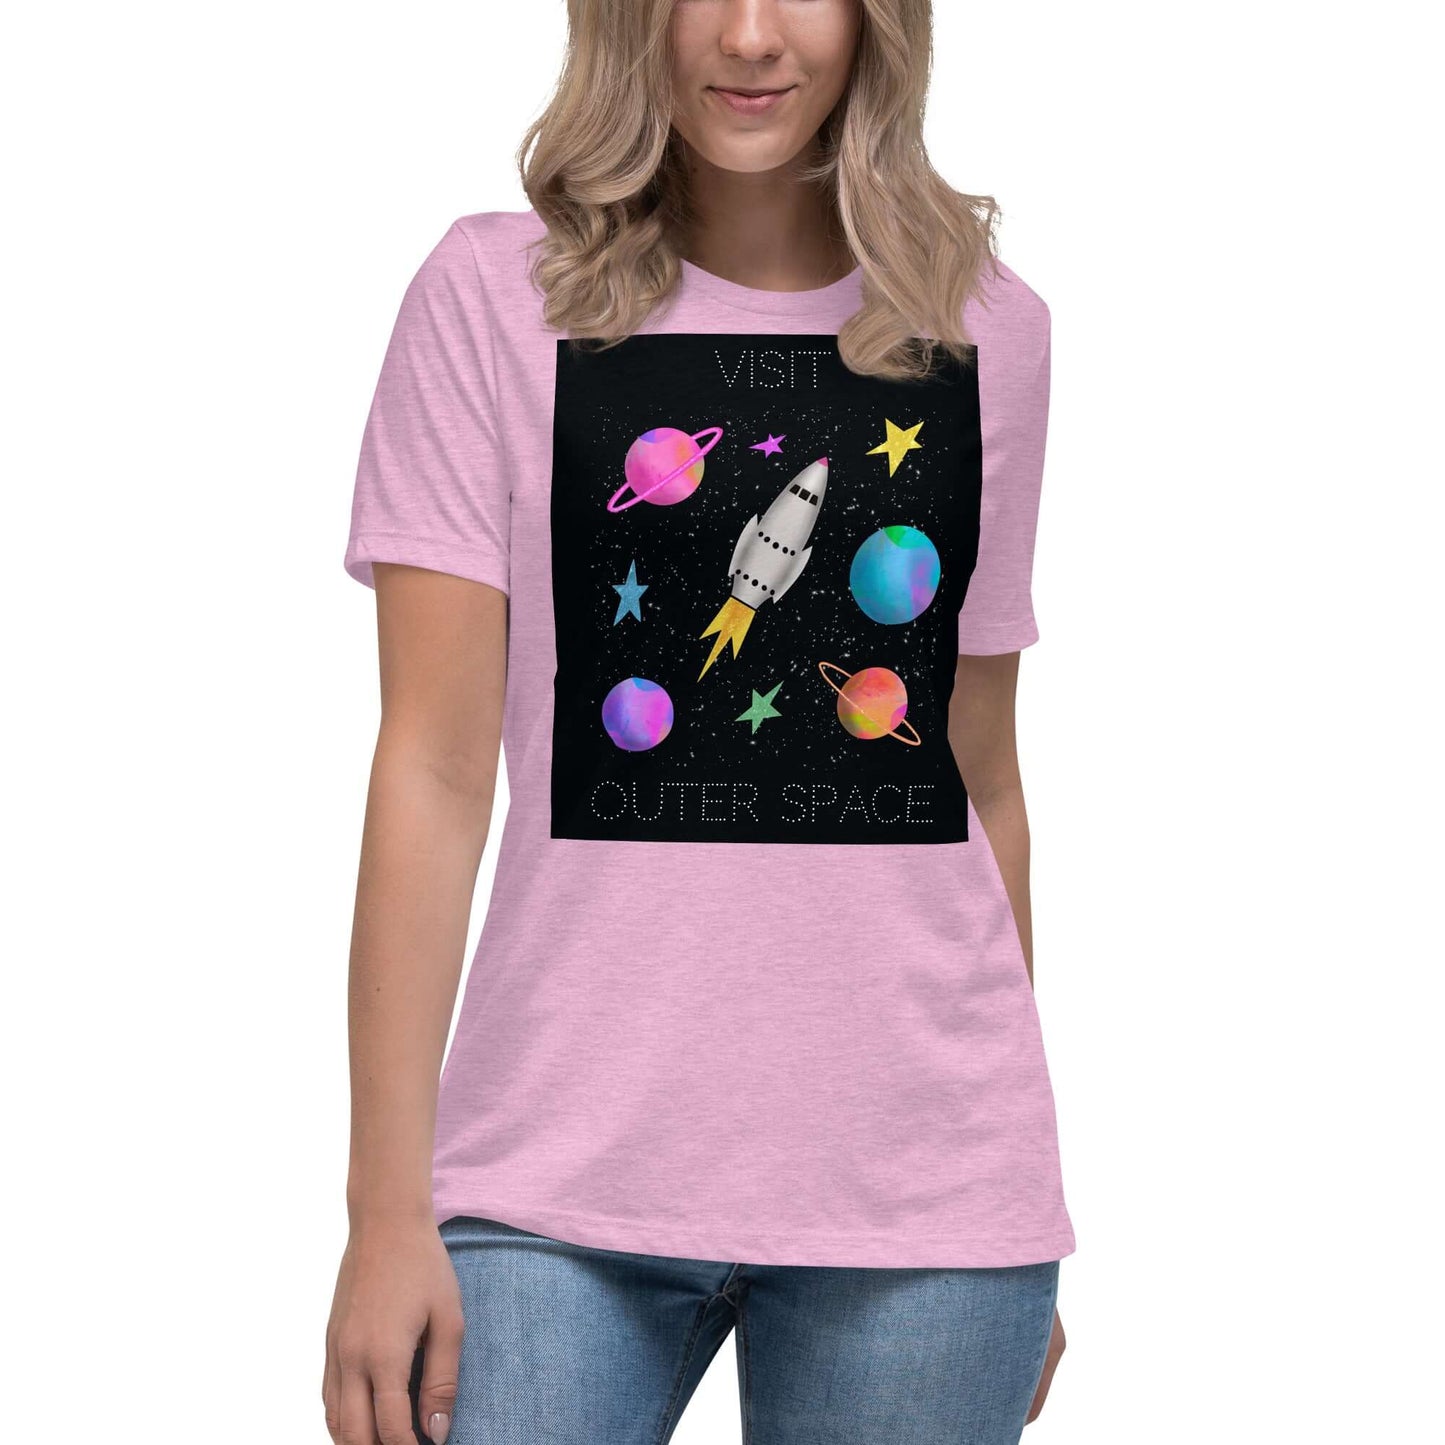 Whimsical Space Rocket with Colorful Planets and Stars on Black Background with Text “Visit Outer Space” Women’s Short Sleeve Tee in Heather Prism Lilac